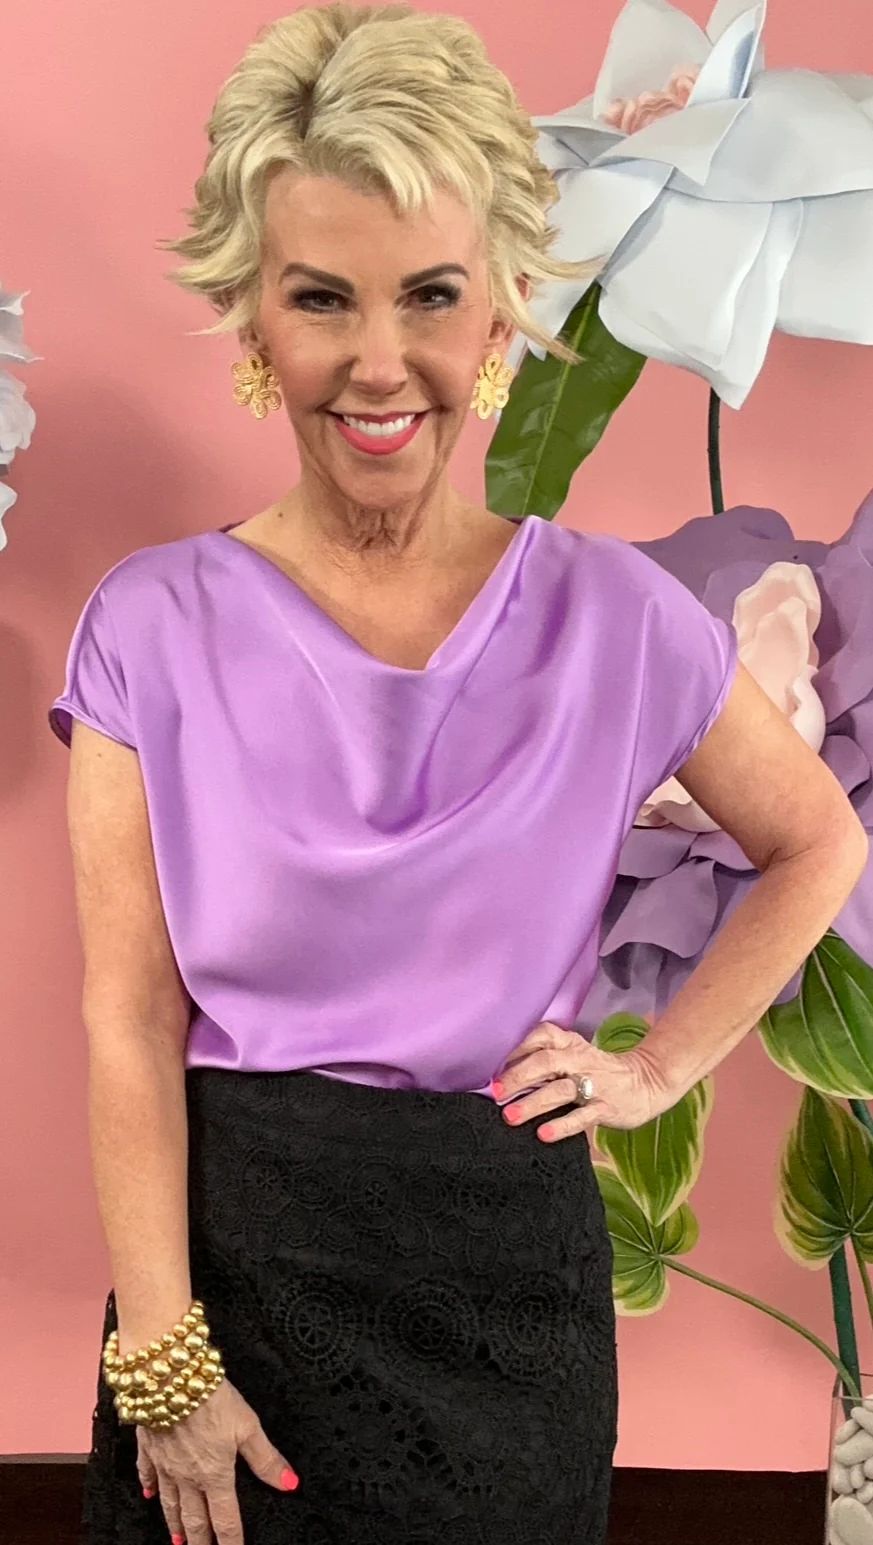 Lovely Lavender Satin Top | Peppered with leopard